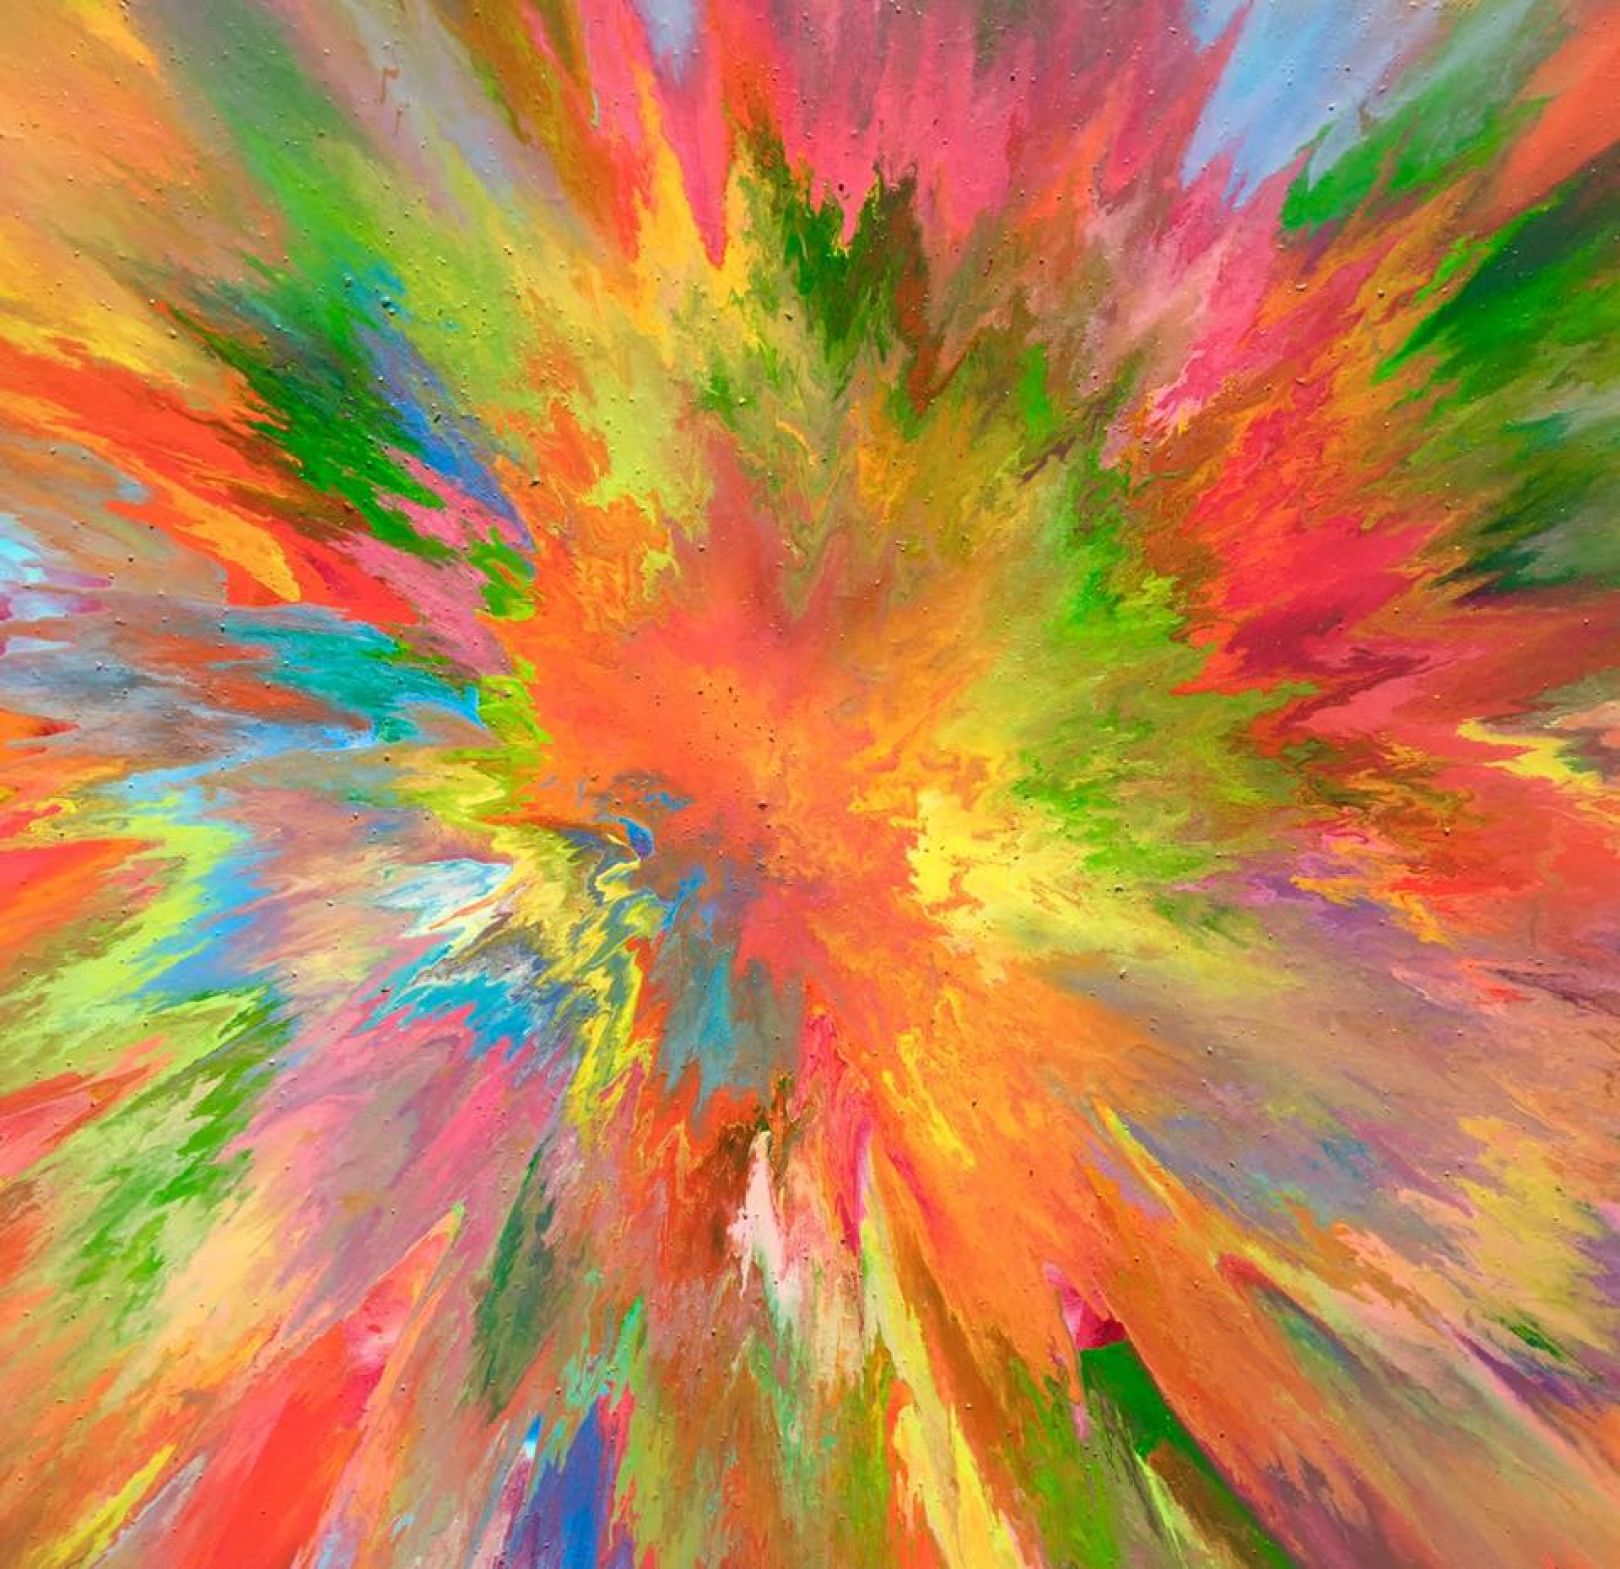 Artist creates bold explosions of colour using thinned oil paint and ...